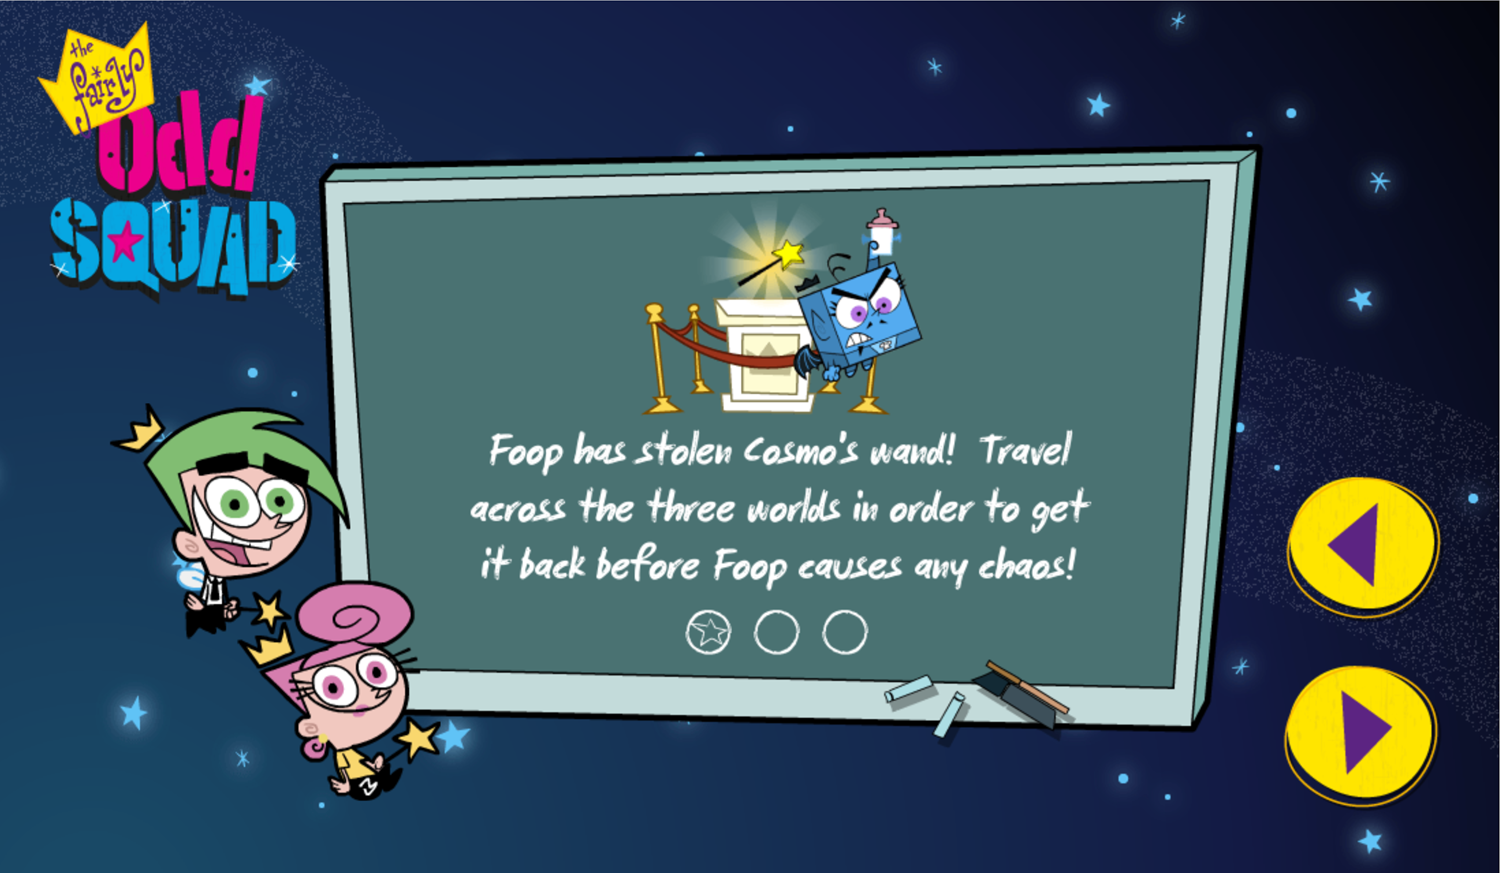 The Fairly OddParents The Fairly odd Squad Game Story Screen Screenshot.